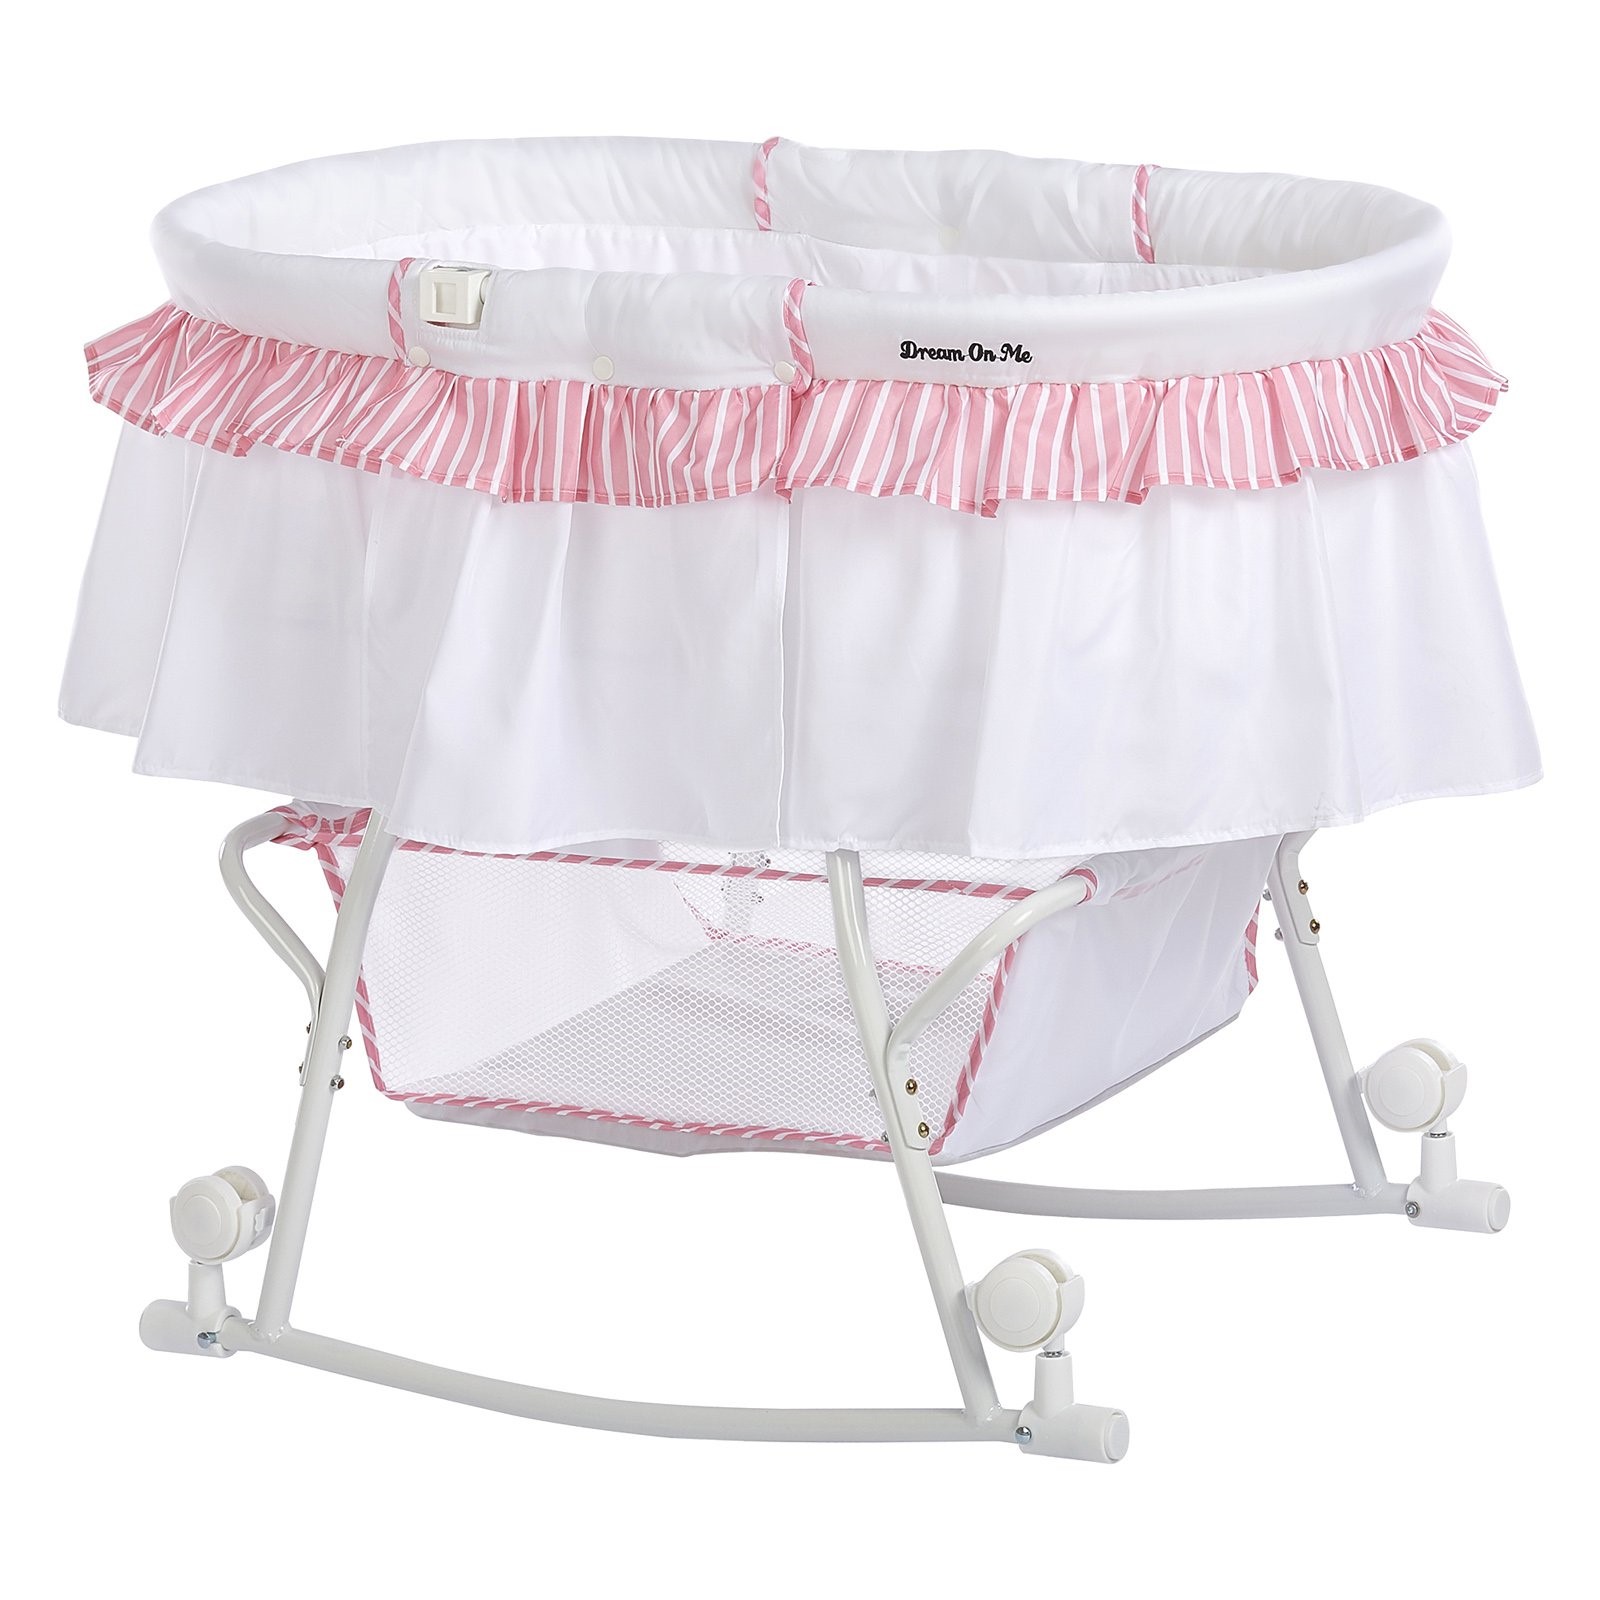 Dream On Me Lacy Portable 2-in-1 Bassinet & Cradle in Pink and White, Lightweight Baby Bassinet - image 1 of 7